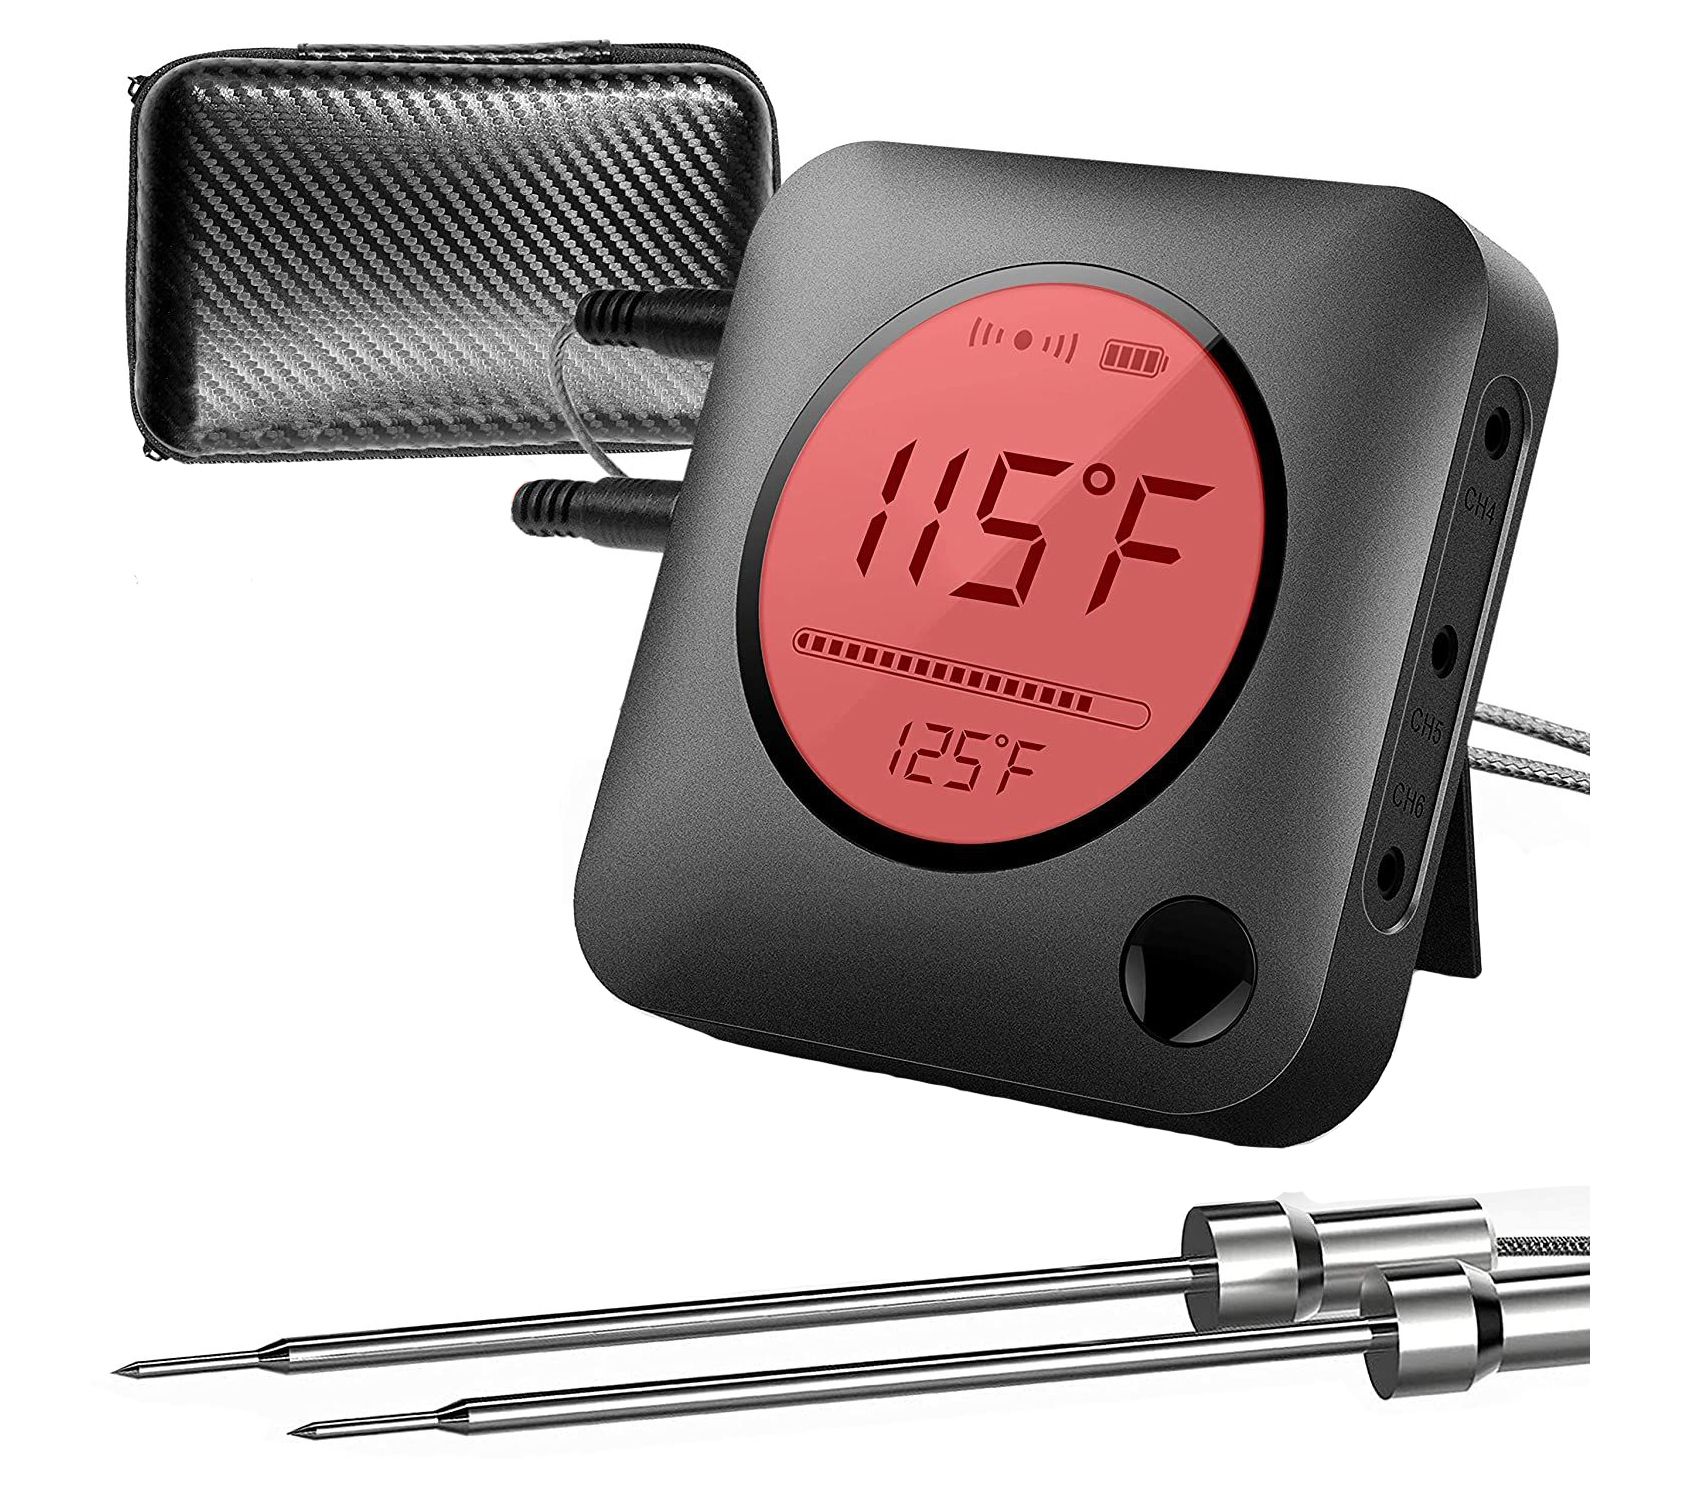 Smart Bluetooth BBQ Grill Thermometer - Digital Display, Stainless Dual Probes